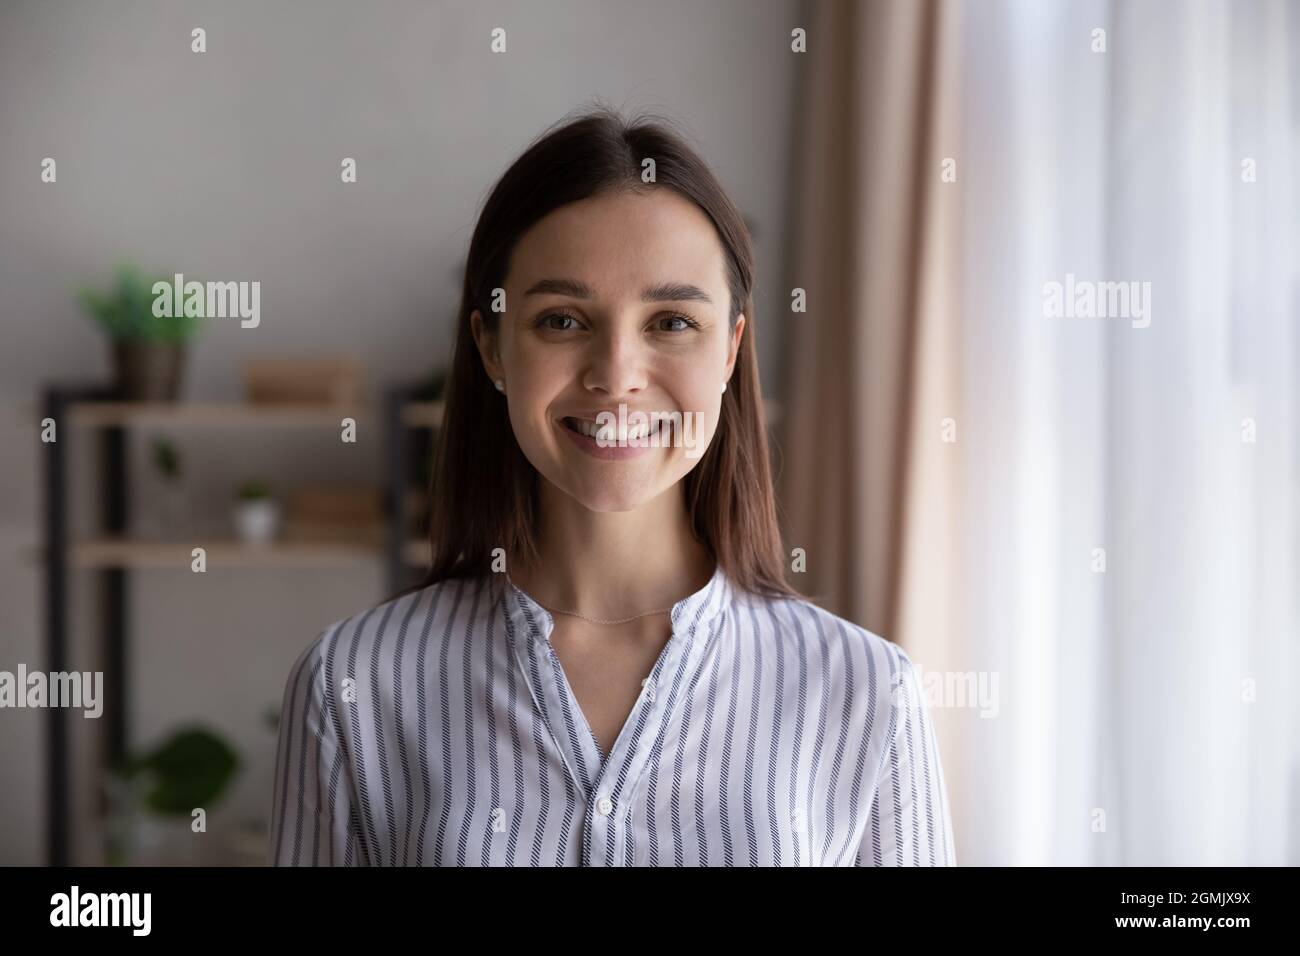 Head shot portrait smiling woman businesswoman student looking at camera Stock Photo